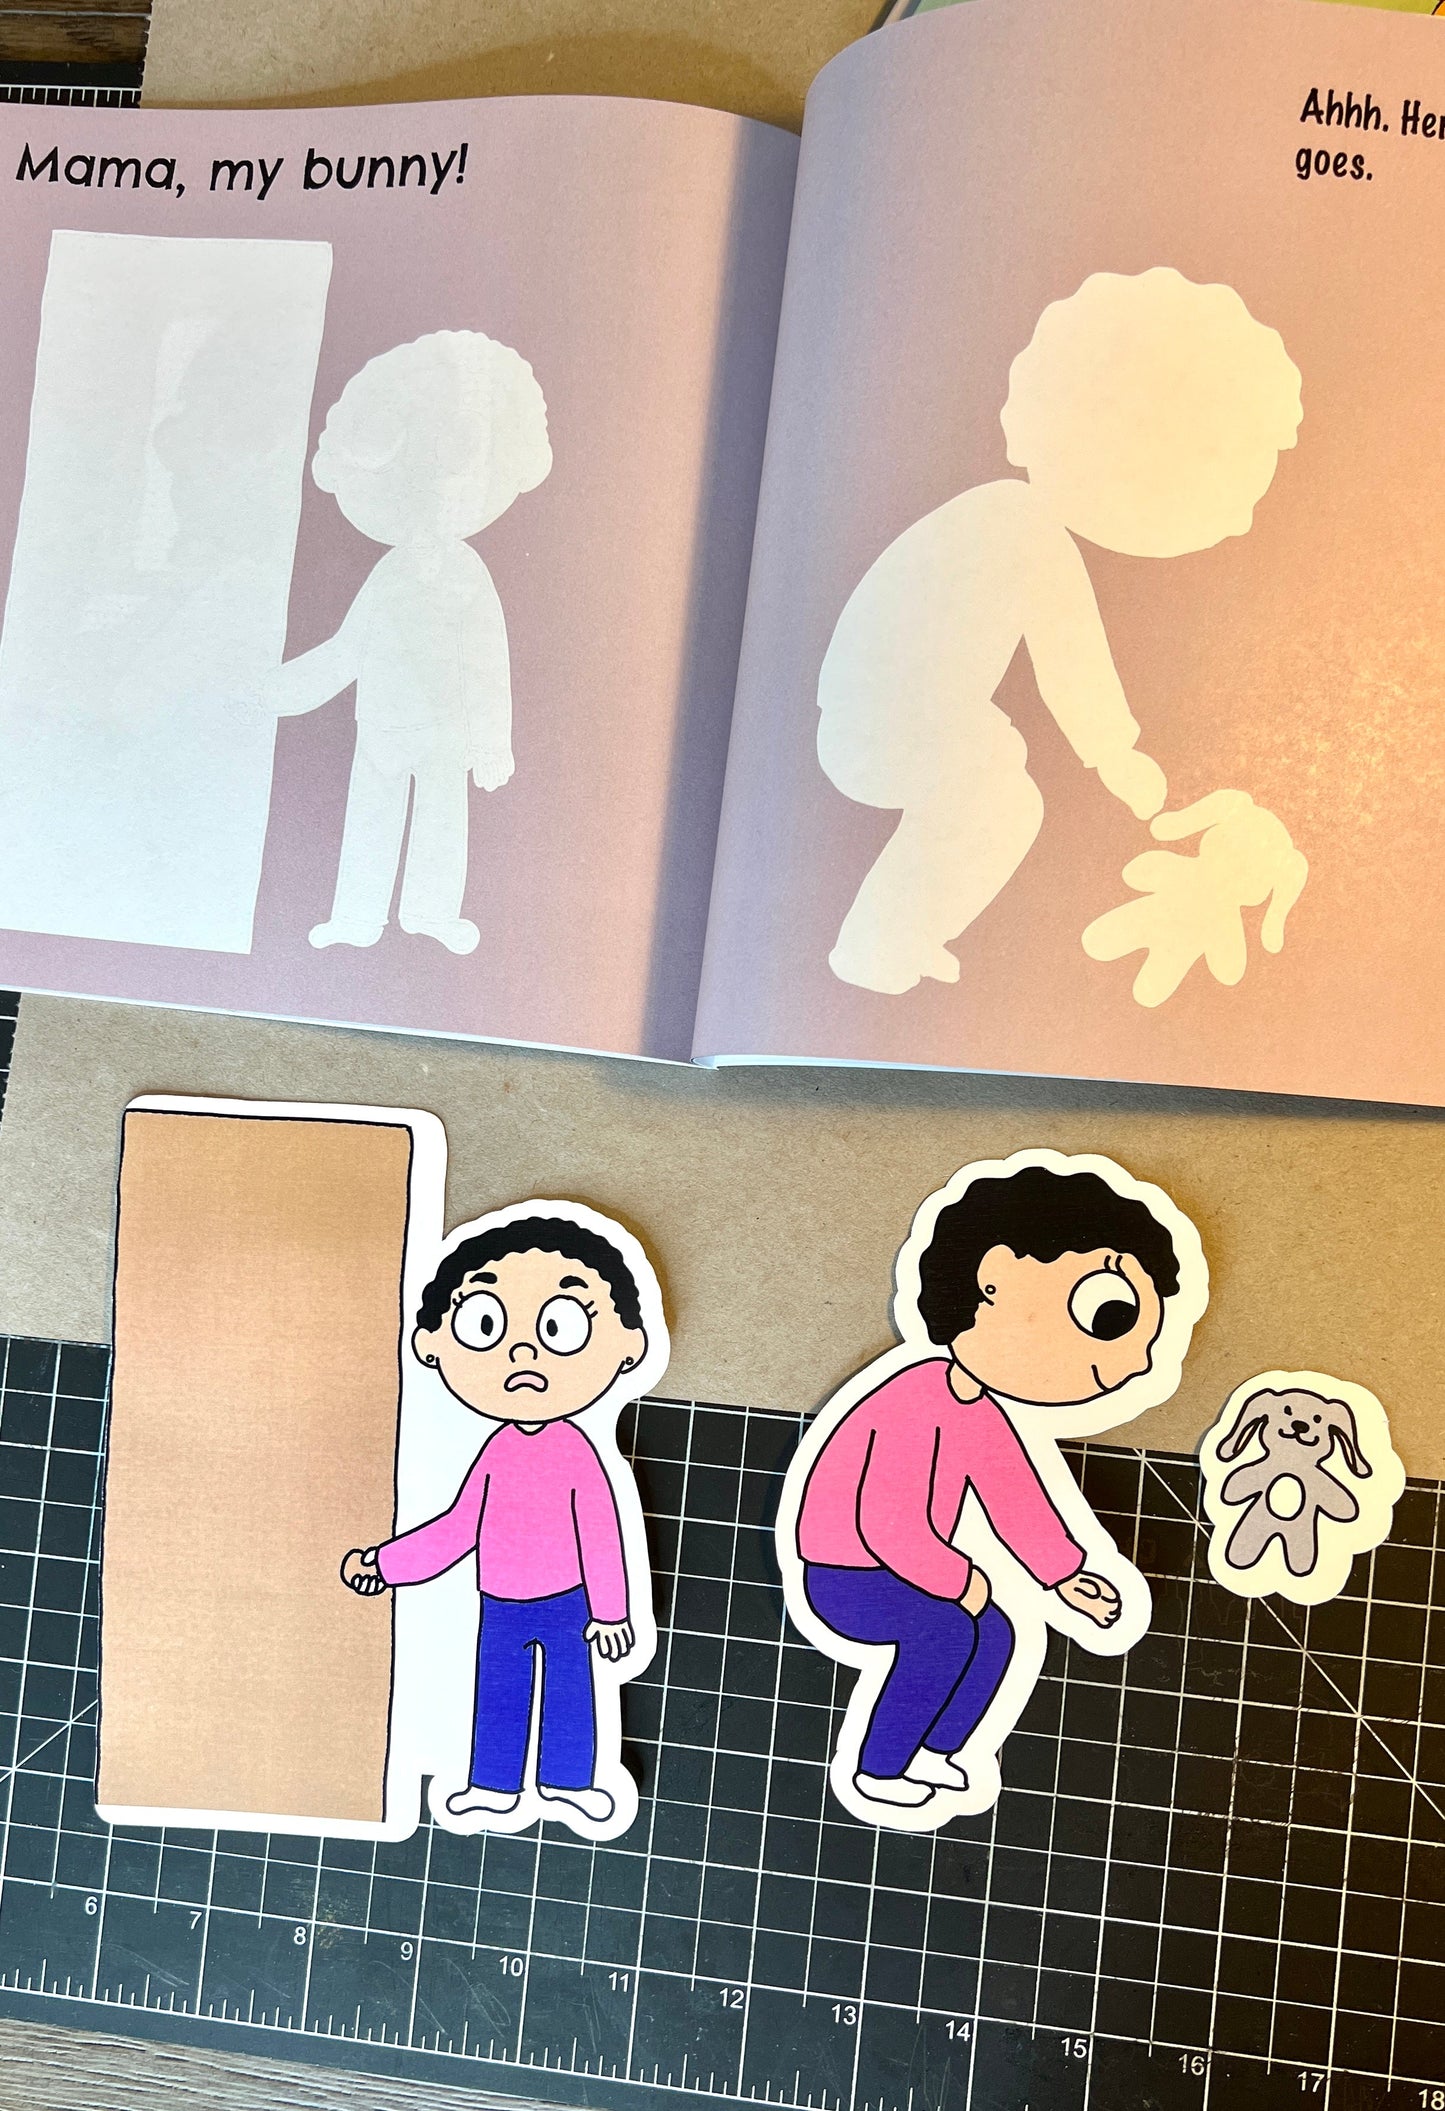 I Am Not Sleepy - Cameron's story  (with stickers)